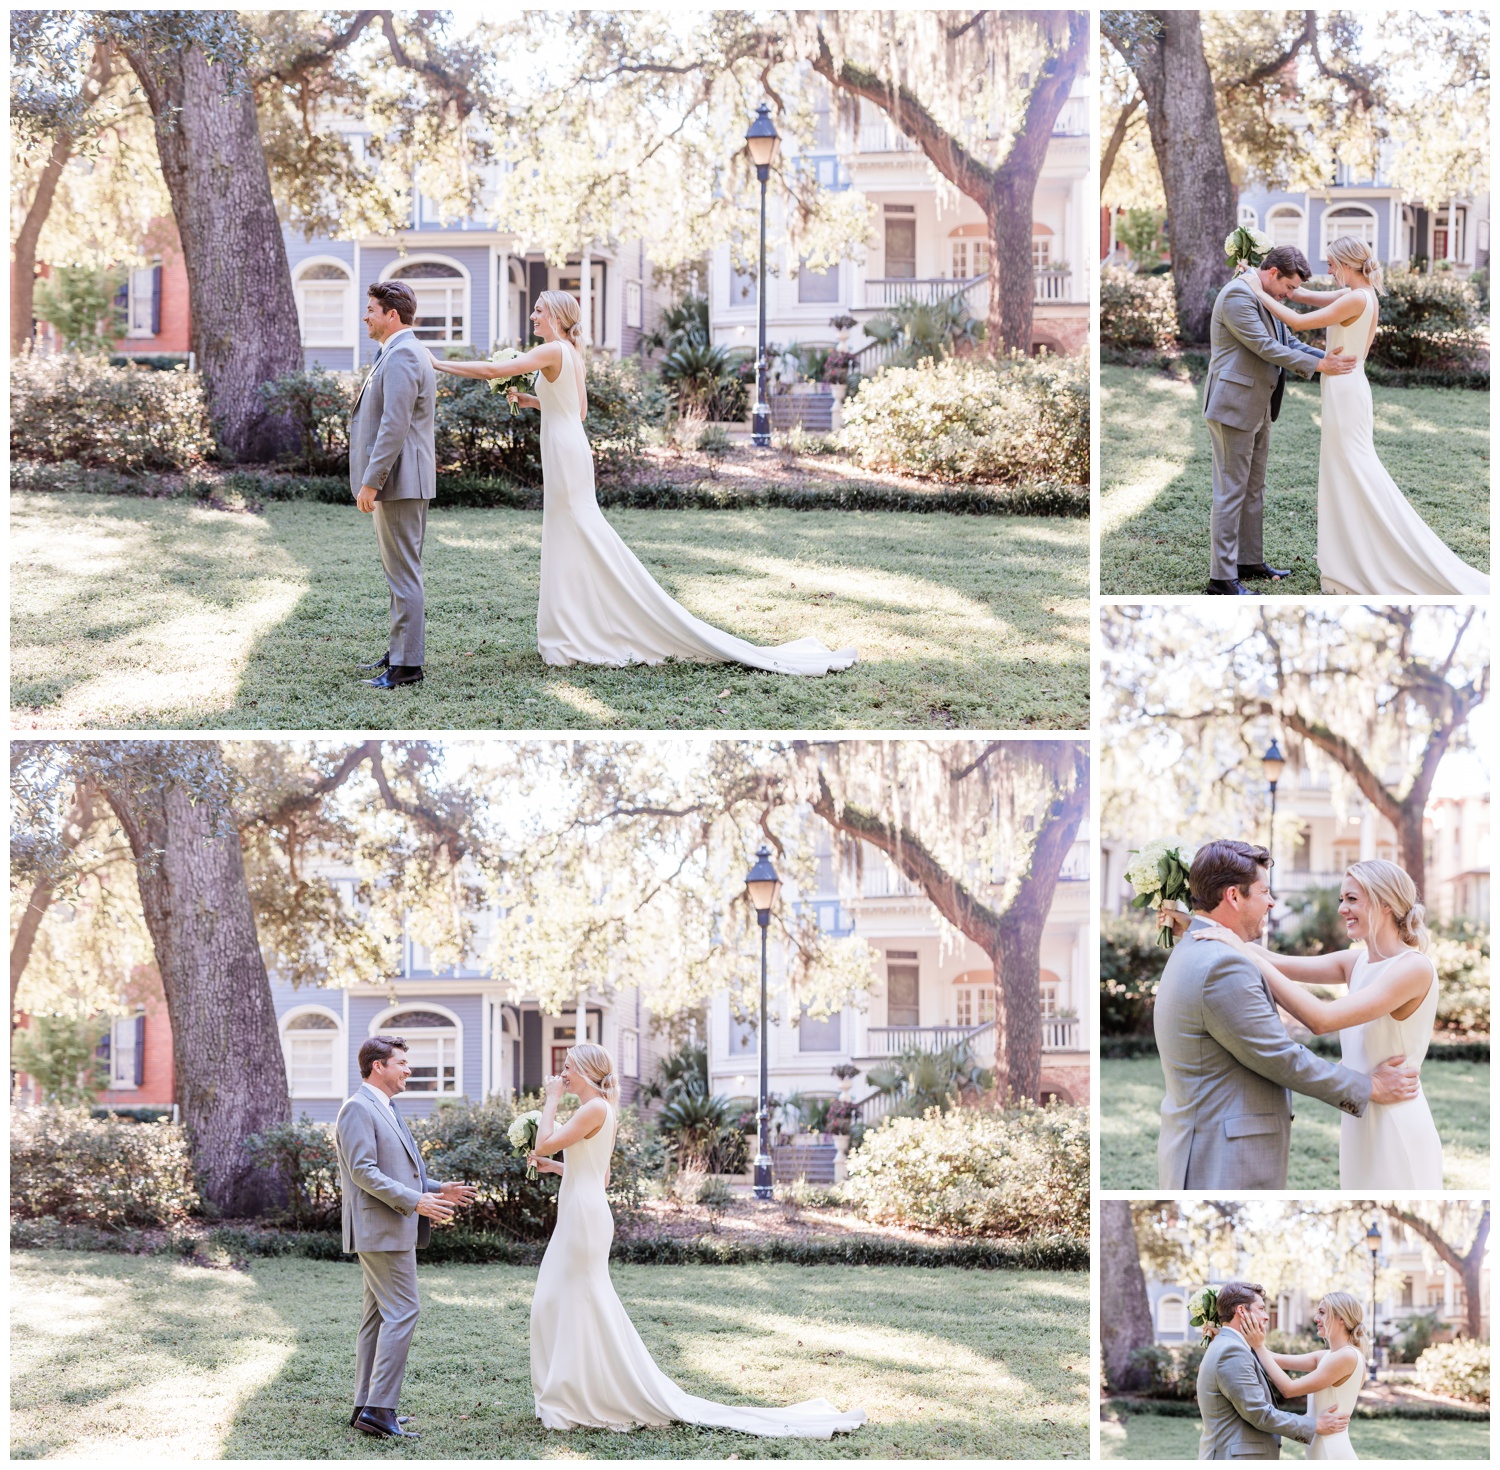 Elopement in downtown savannah - first look photos - Taylor brown photography for the savannah elopement package